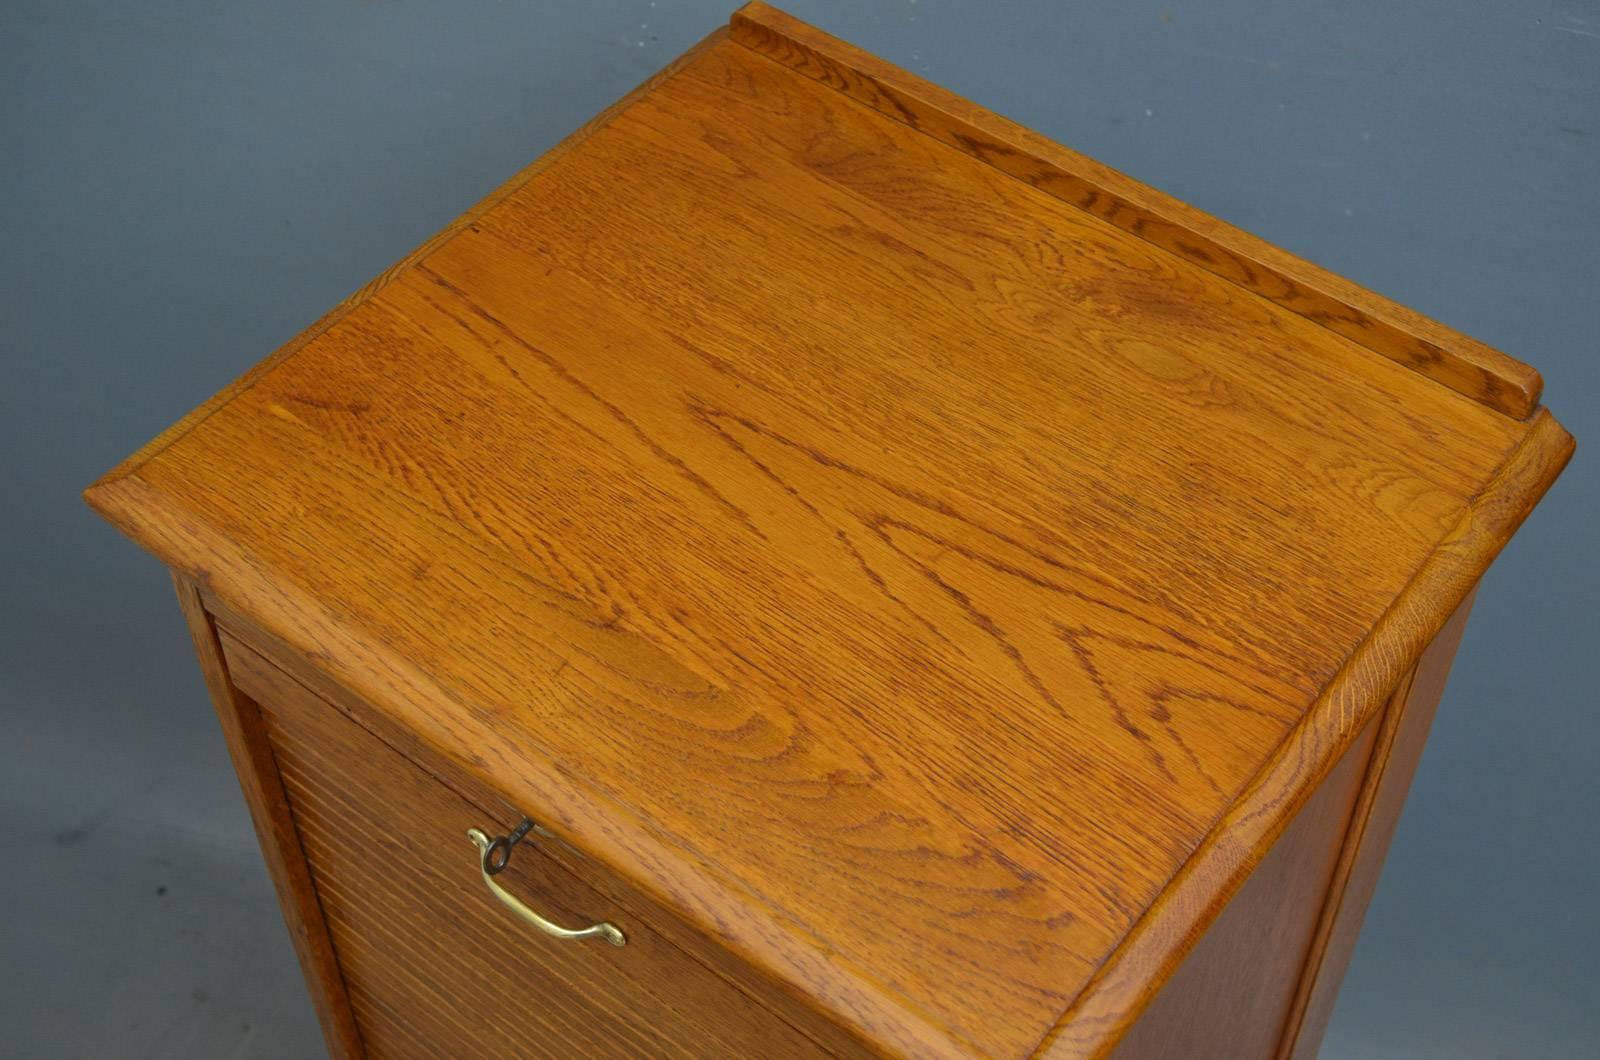 Sn4271, turn of the century oak, tambour fronted filing cabinet of soft color, having moulded top and panelled sides above tambour front enclosing nine drawers, fitted with original working lock and key, standing on plinth base. This antique filing